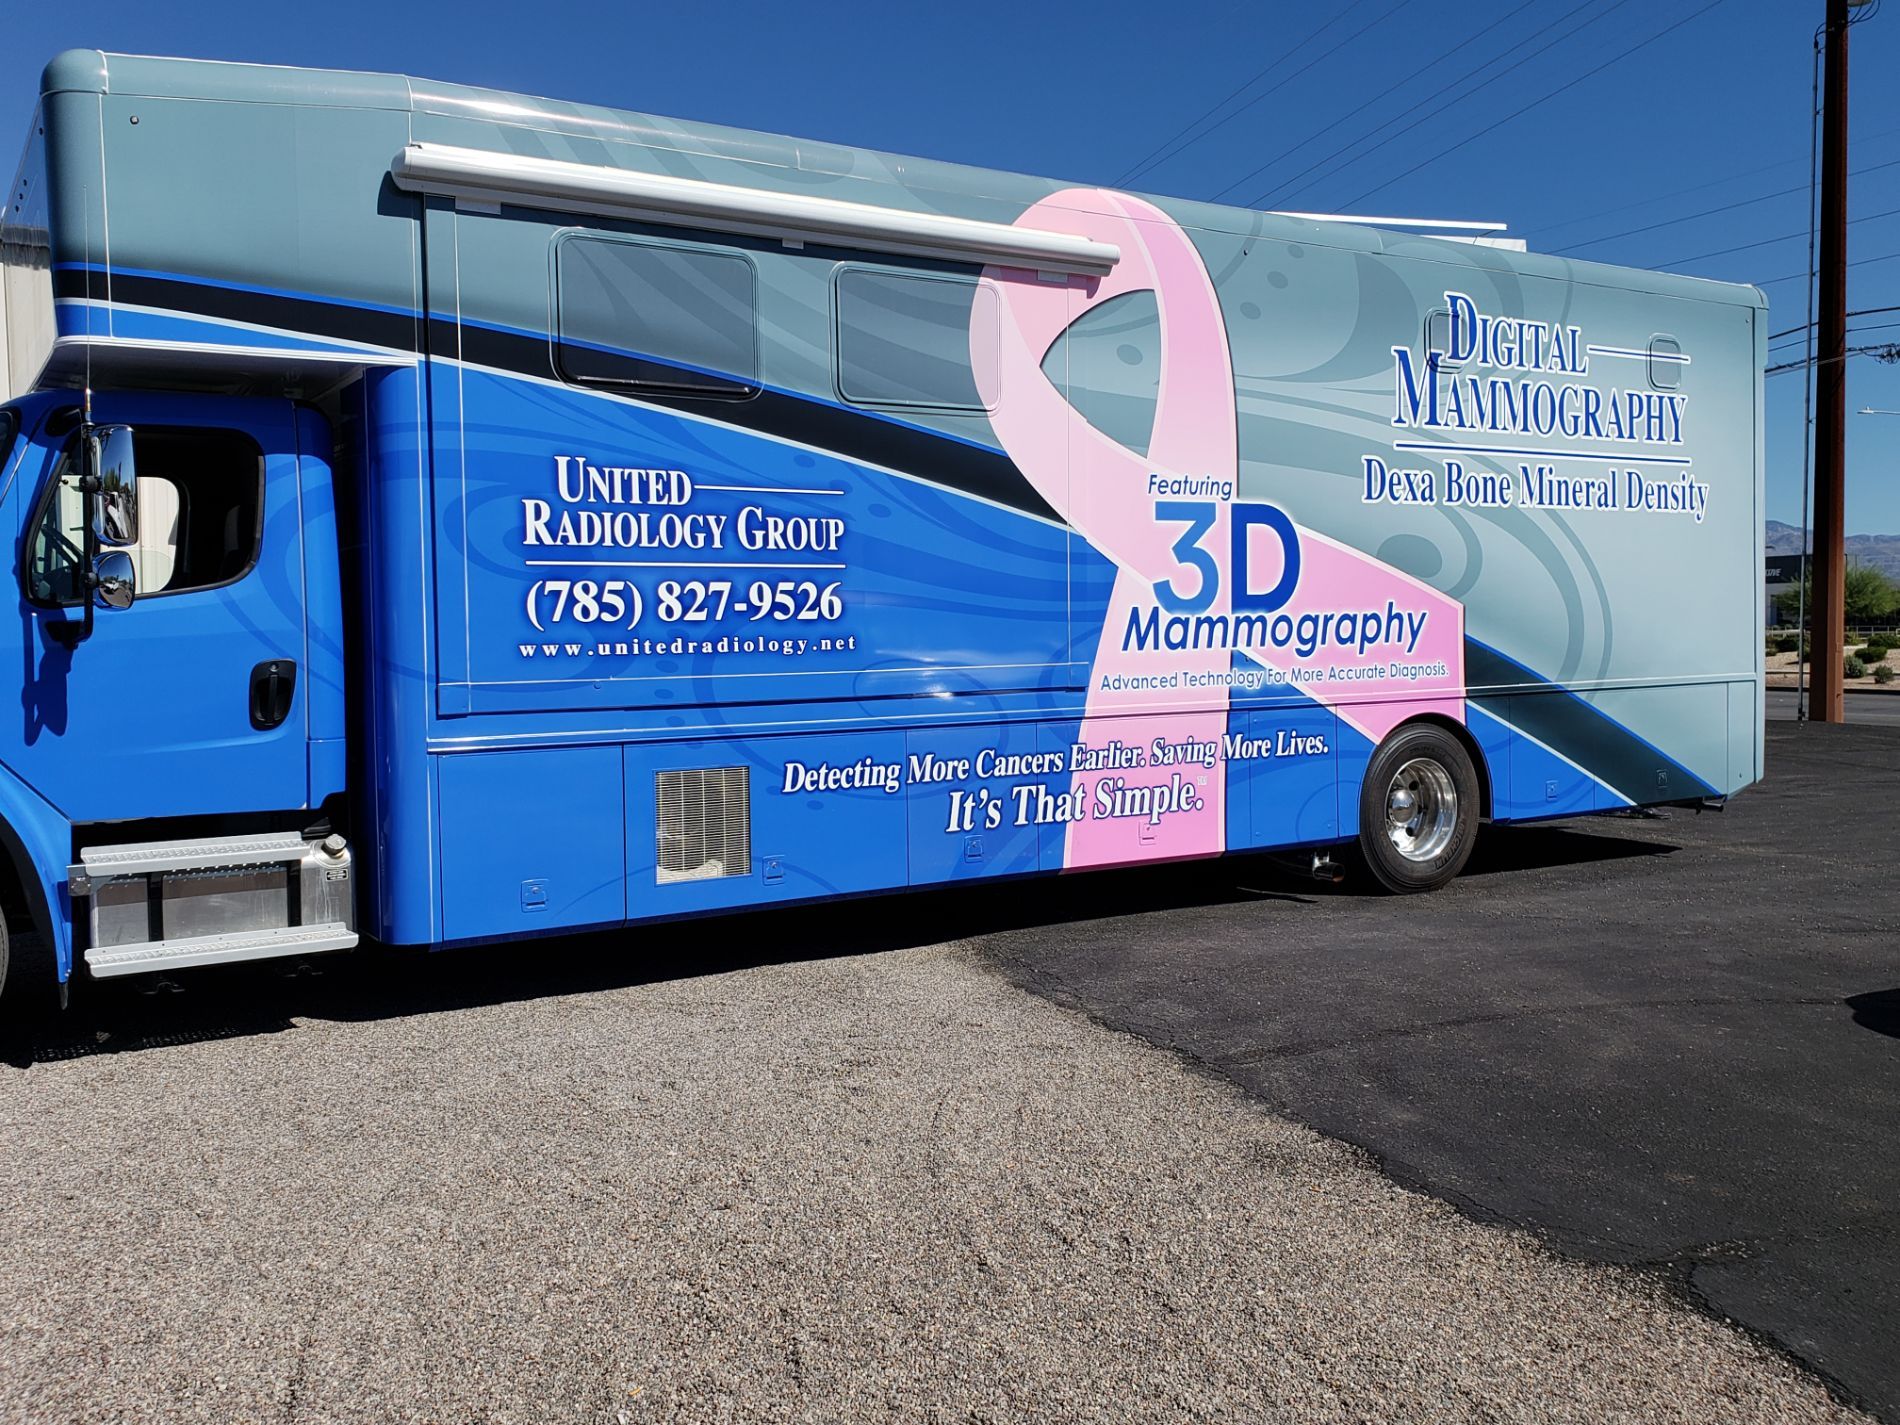 Mobile medical unit that was just wrapped in blue and grey with pink breast cancer logo